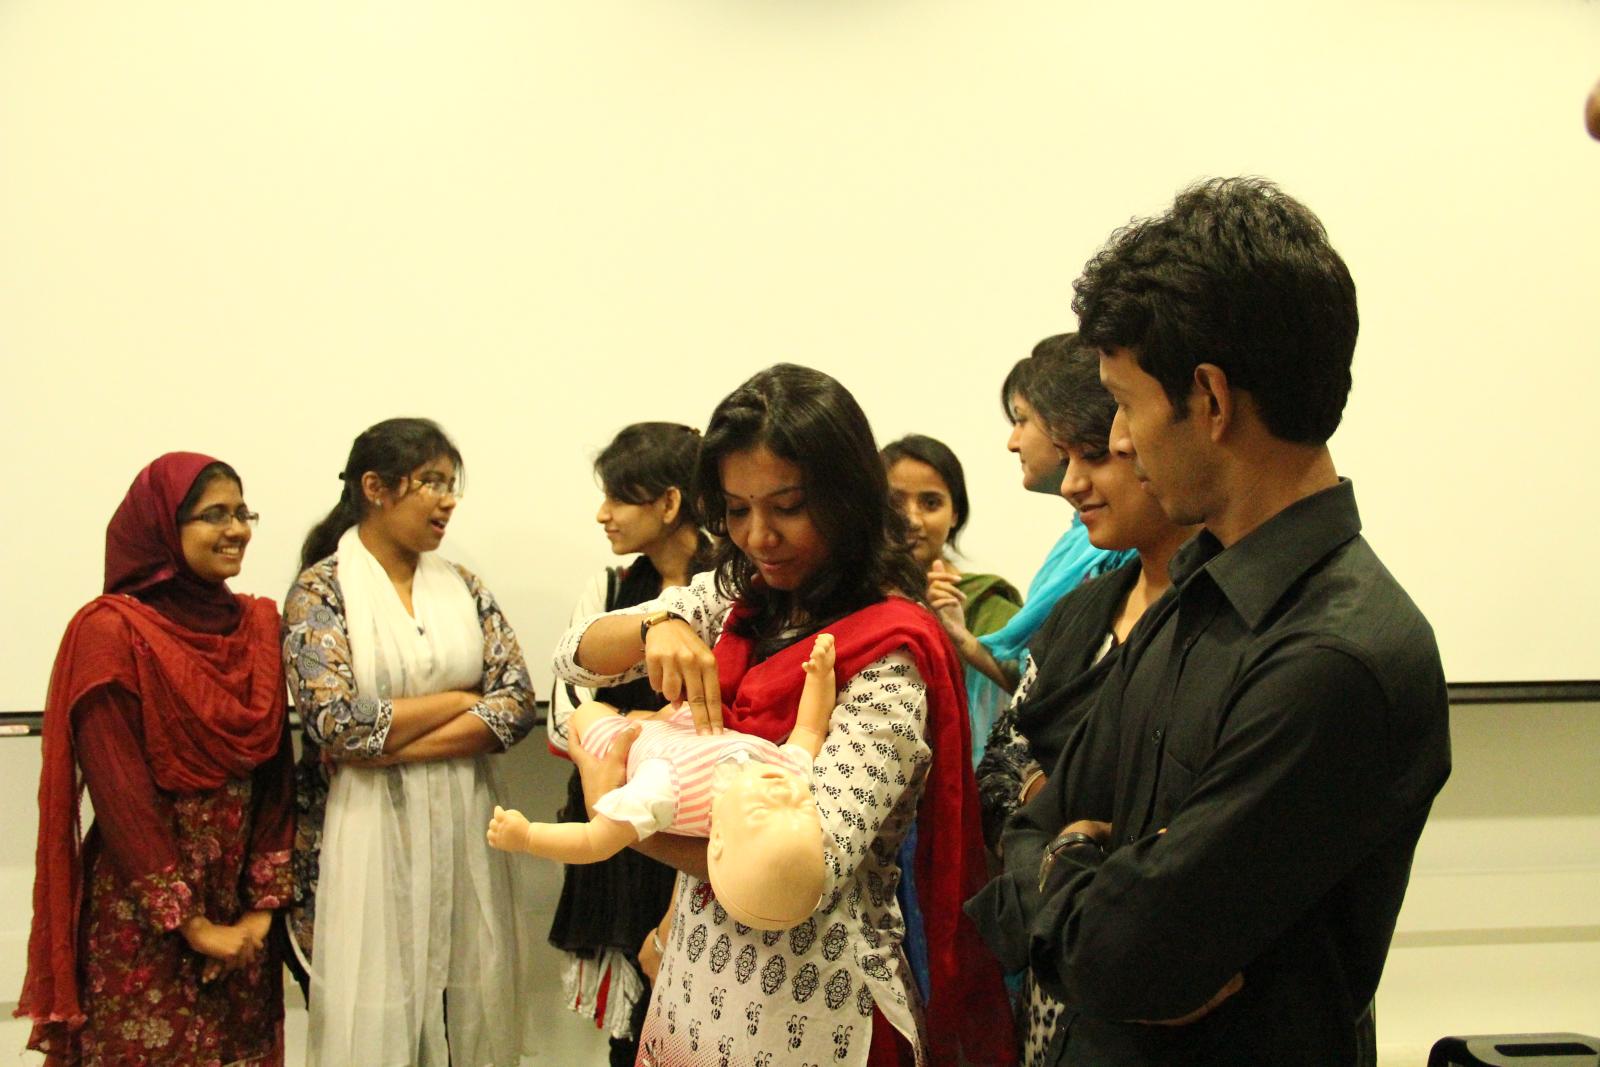 a group of people stand together with a baby